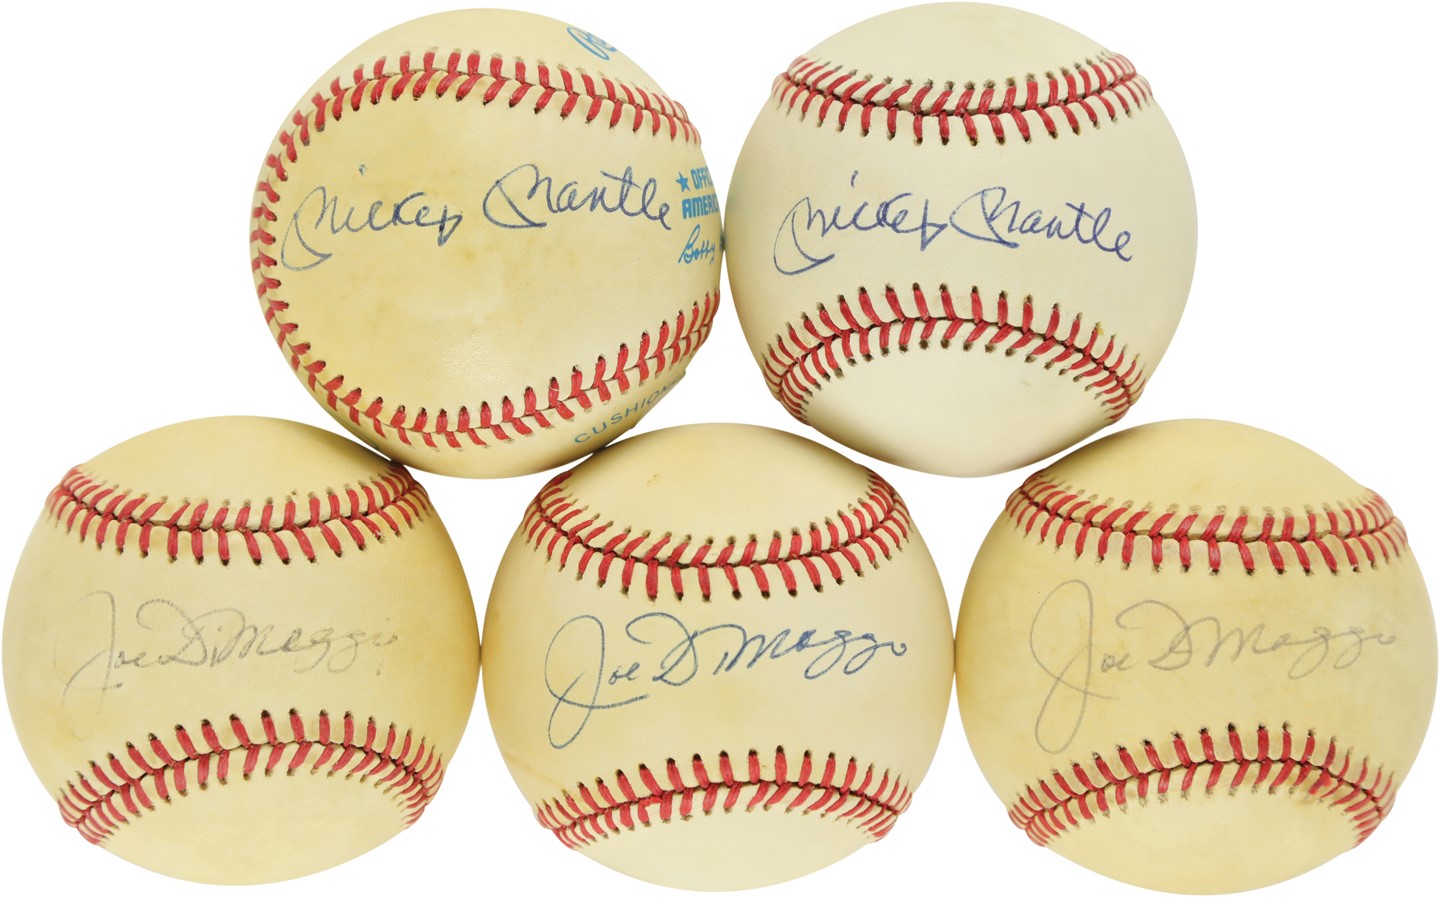 - Five Mickey Mantle and Joe DiMaggio Signed Baseballs with One Dual-Signed (All PSA)